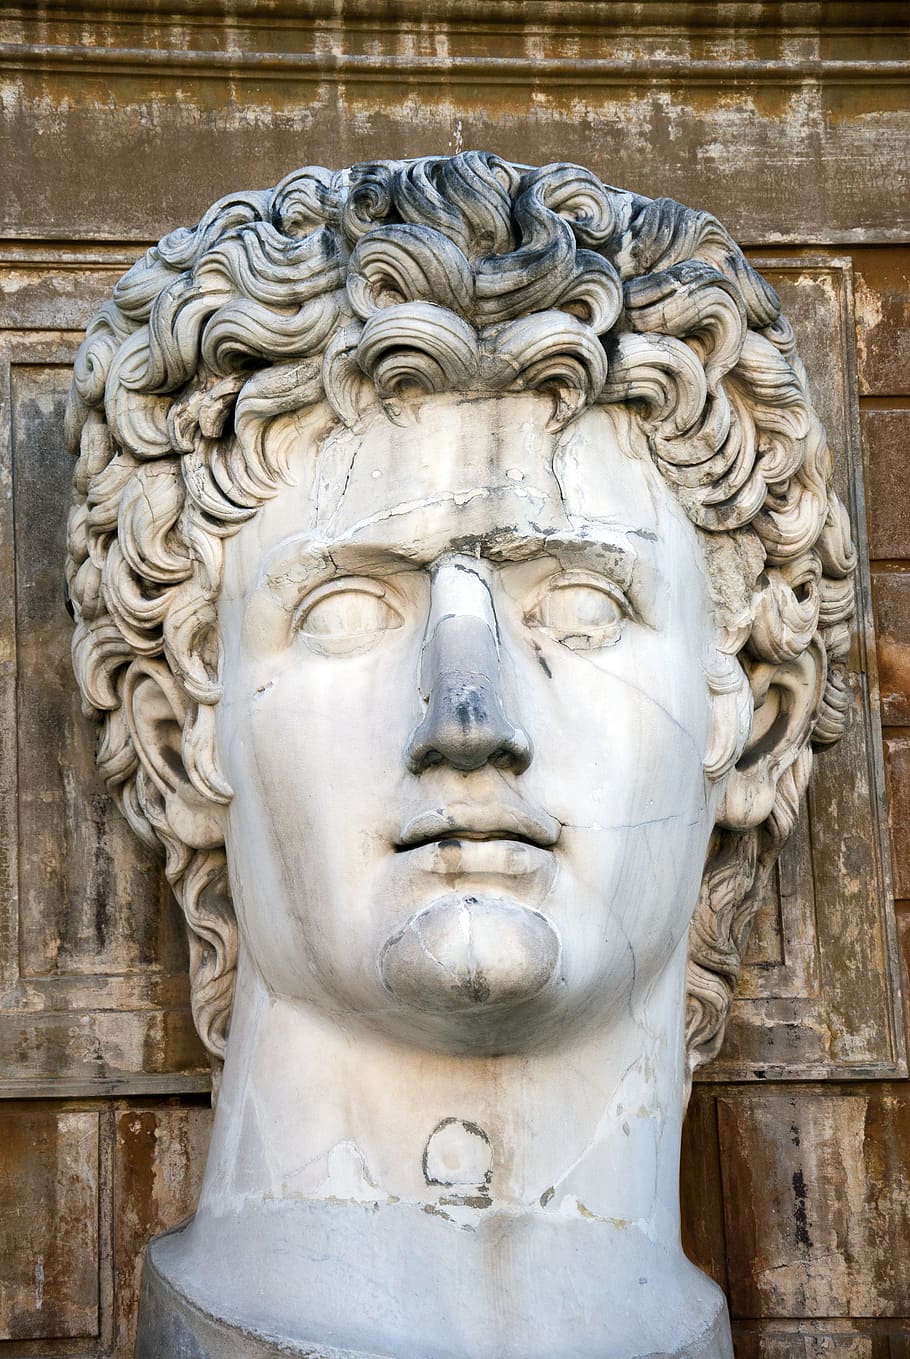 Augustus, Main, Statue, Rome, ancient times, face, stone, italy, architecture, sculpture